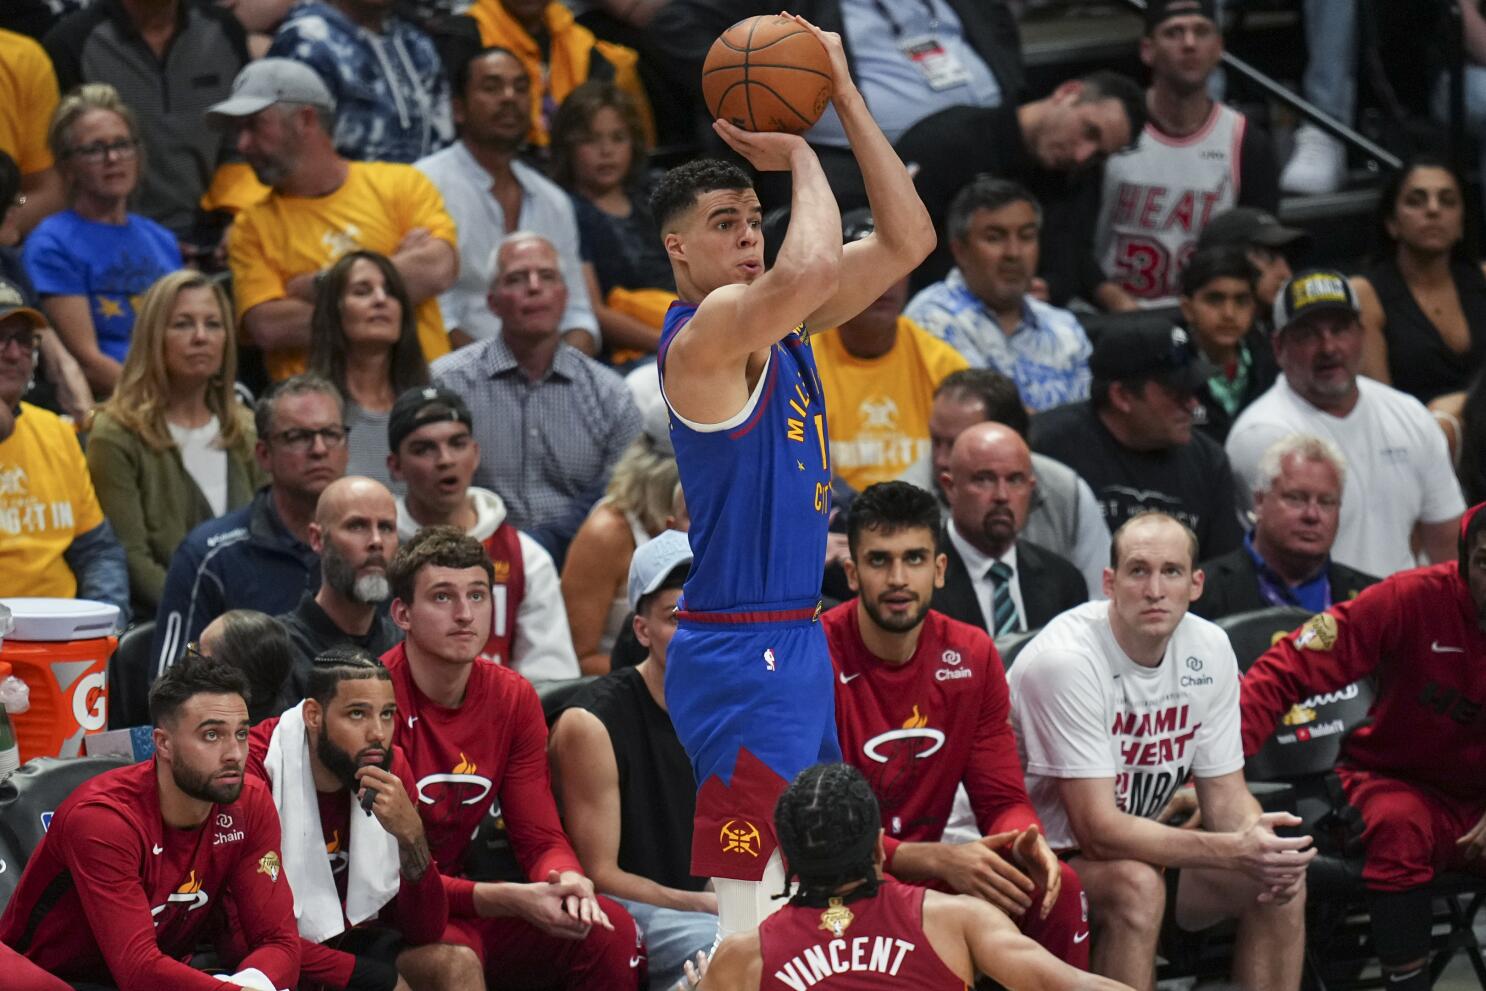 Michael Porter Jr., his shot off, does other things in Game 1 win